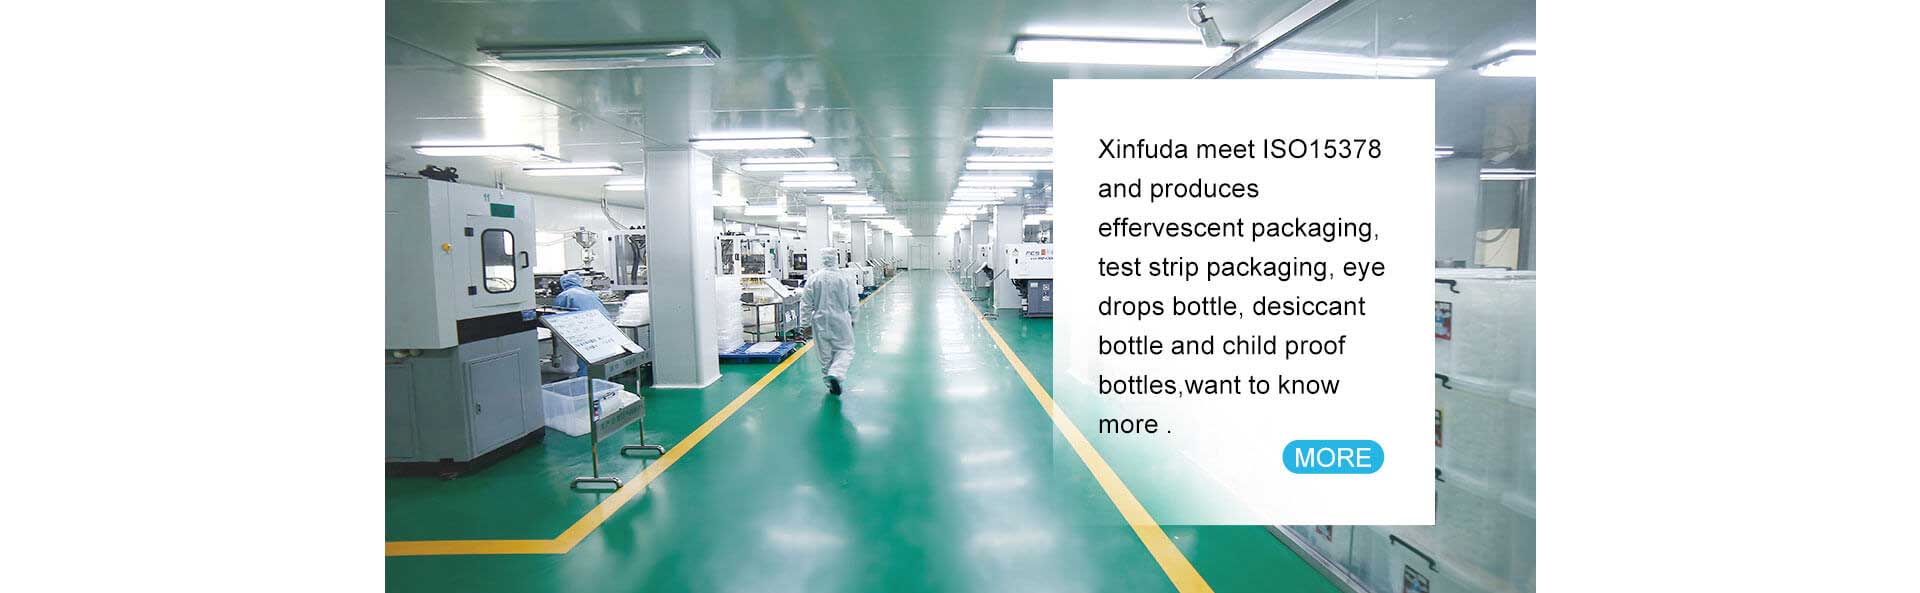 Xinfuda meet ISO15378 and produces effervescent packaging, test strip packaging, eye drops bottle, desiccant bottle and child proof bottles, want to know more